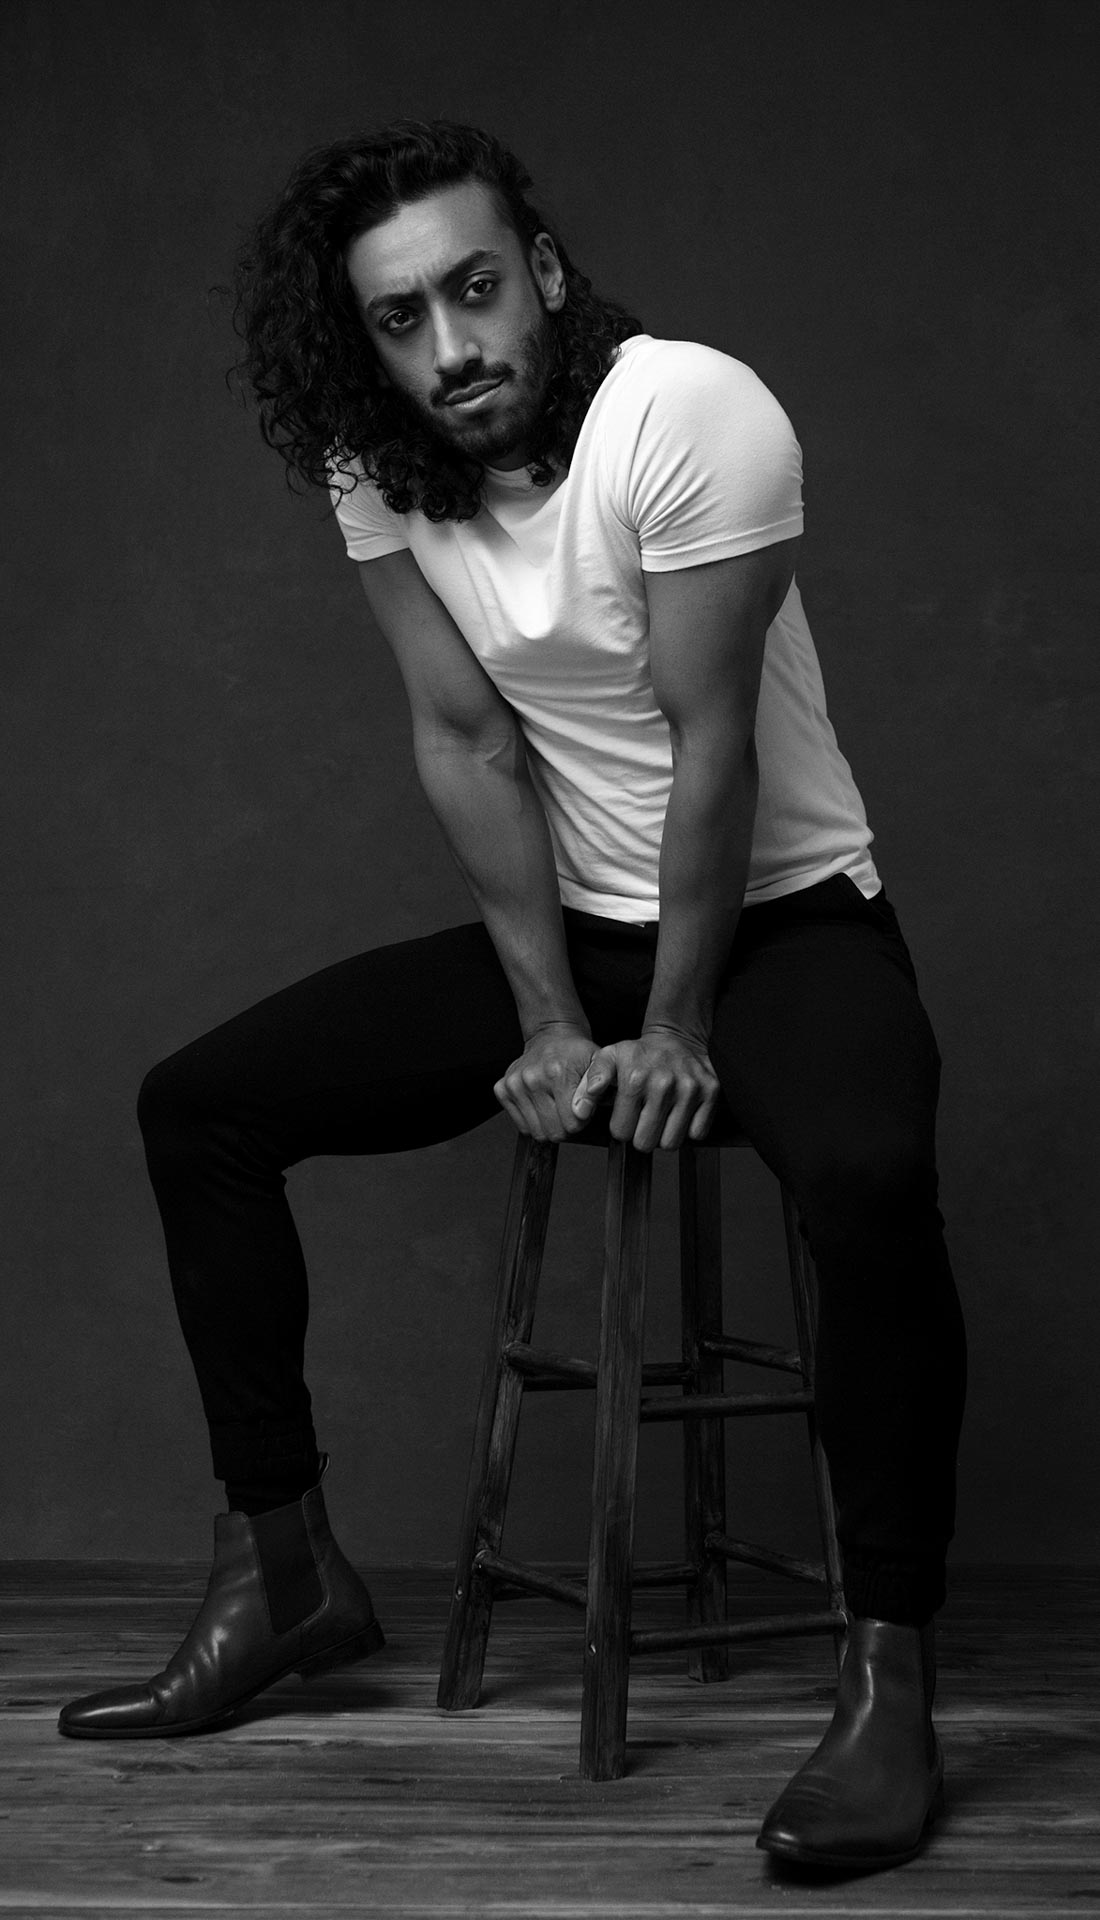 Man with long hair posing on a stool. Editorial portrait photography session